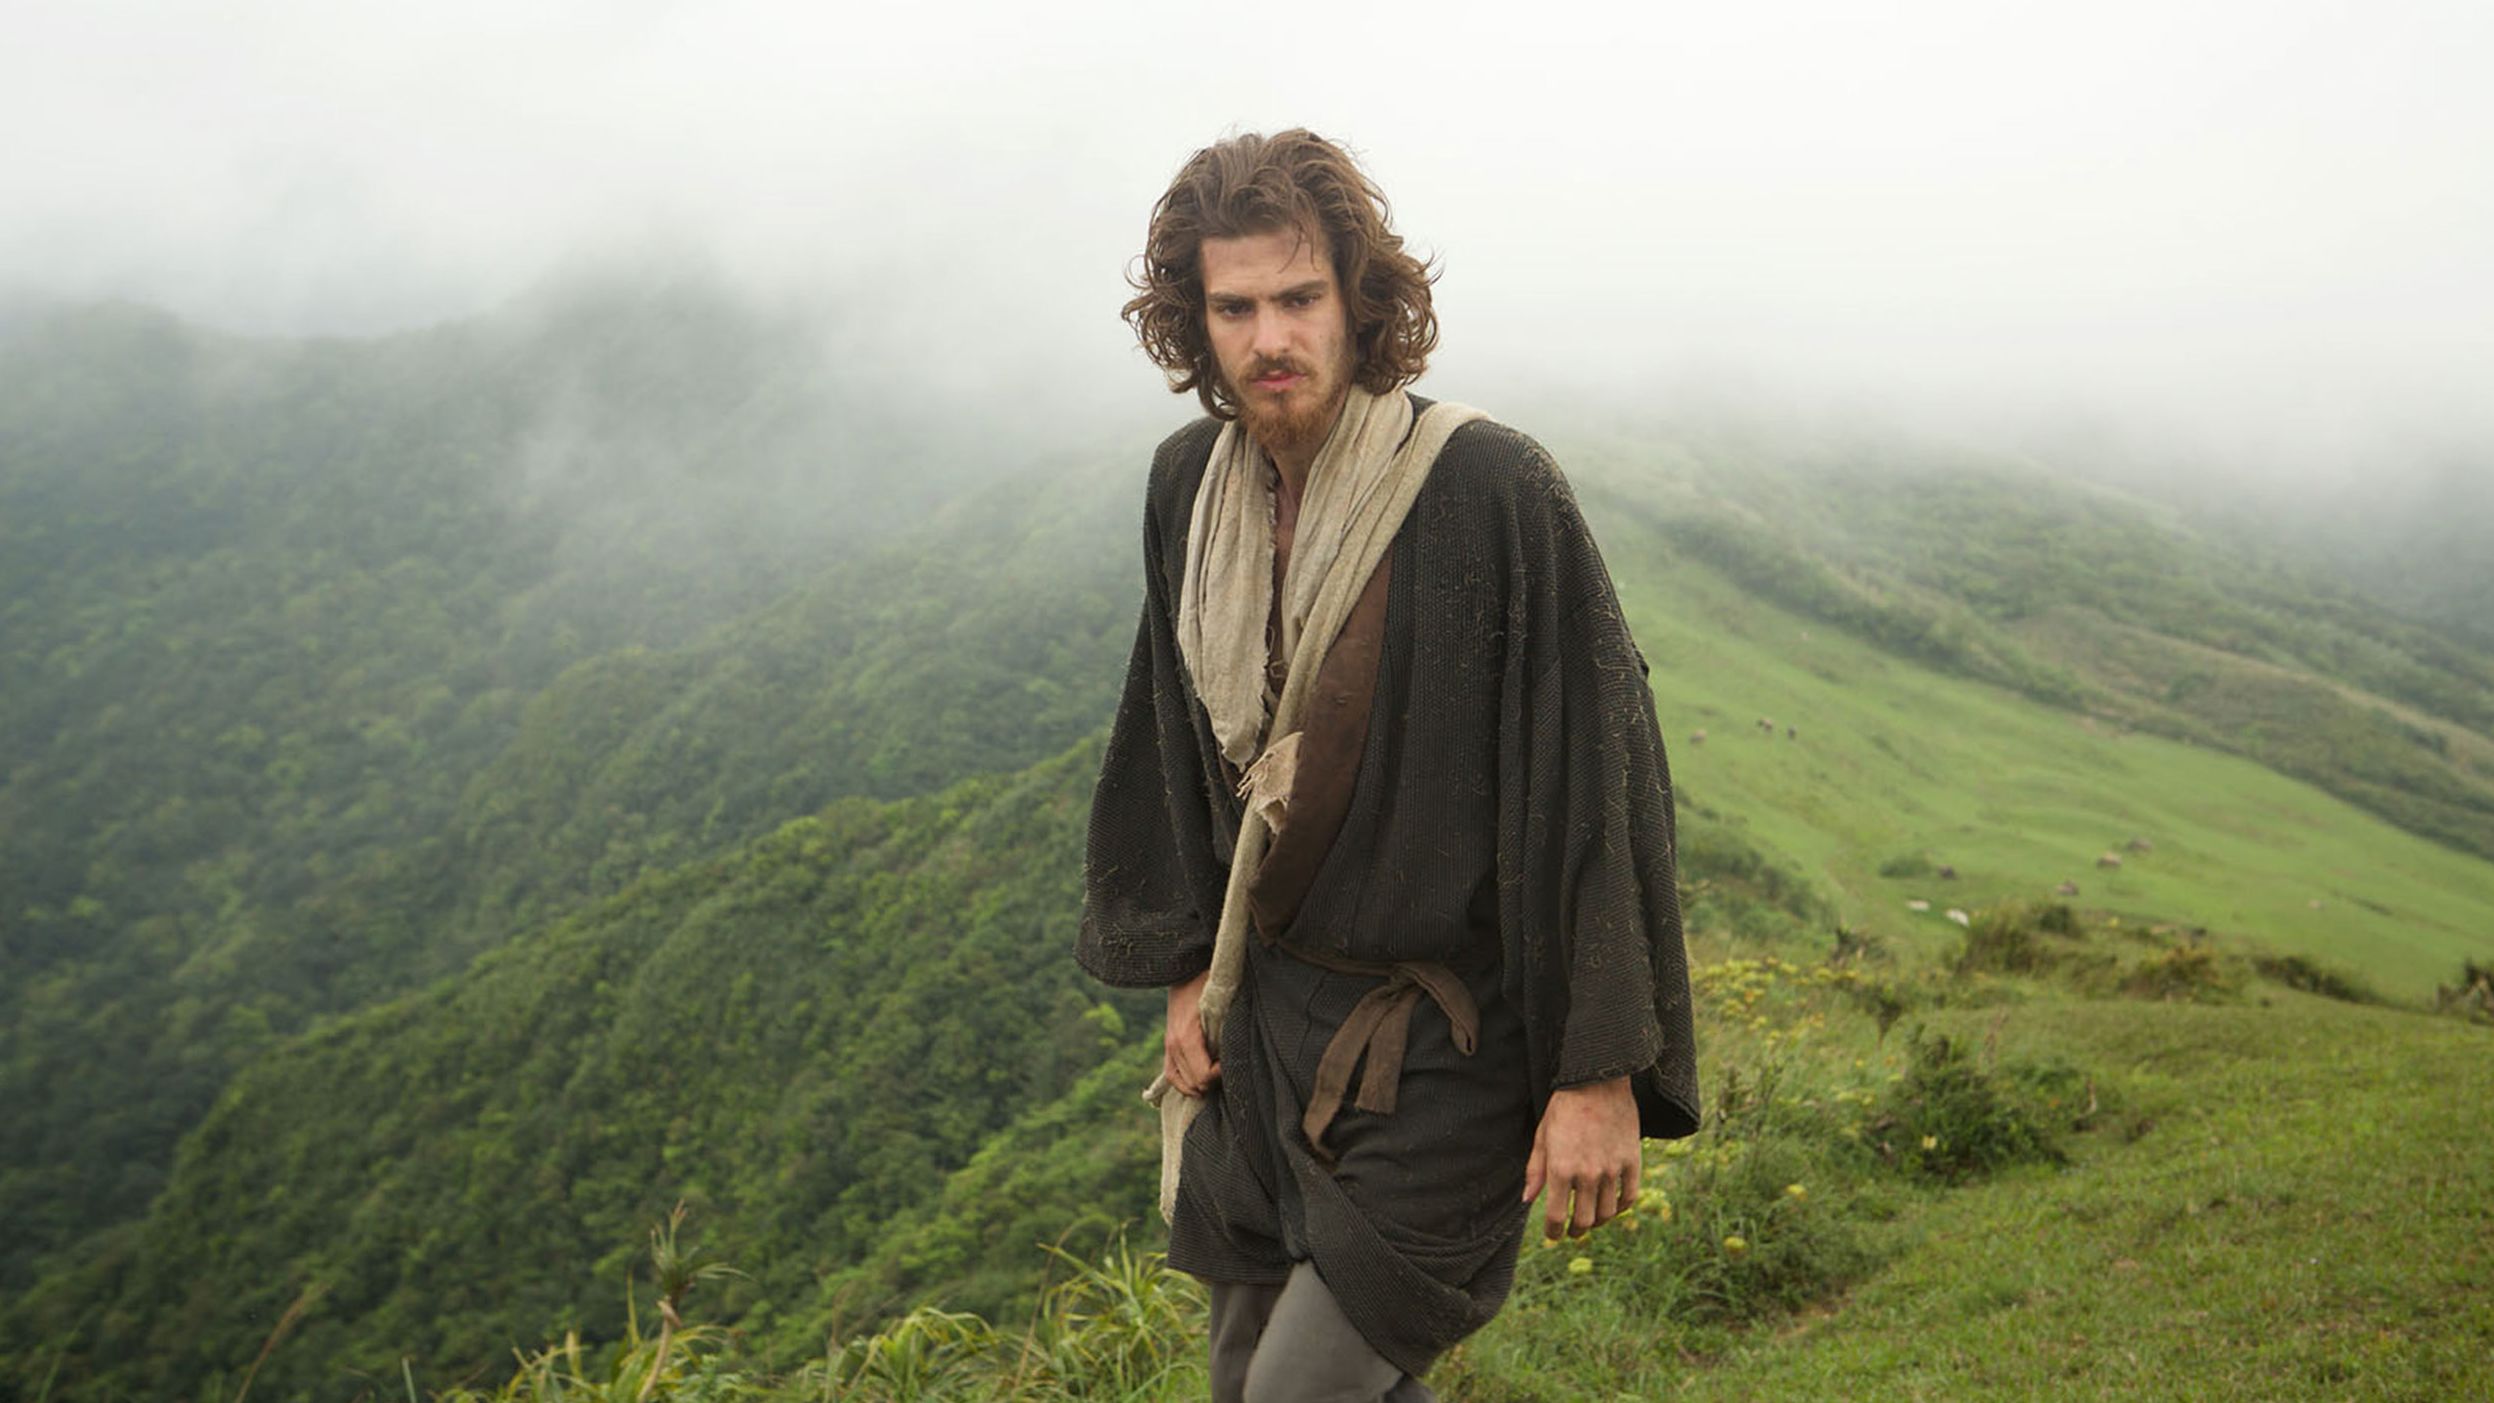 Andrew Garfield said he had some "wild, trippy experiences" while forgoing "sex and food" for his role in the 2016 film "Silence."